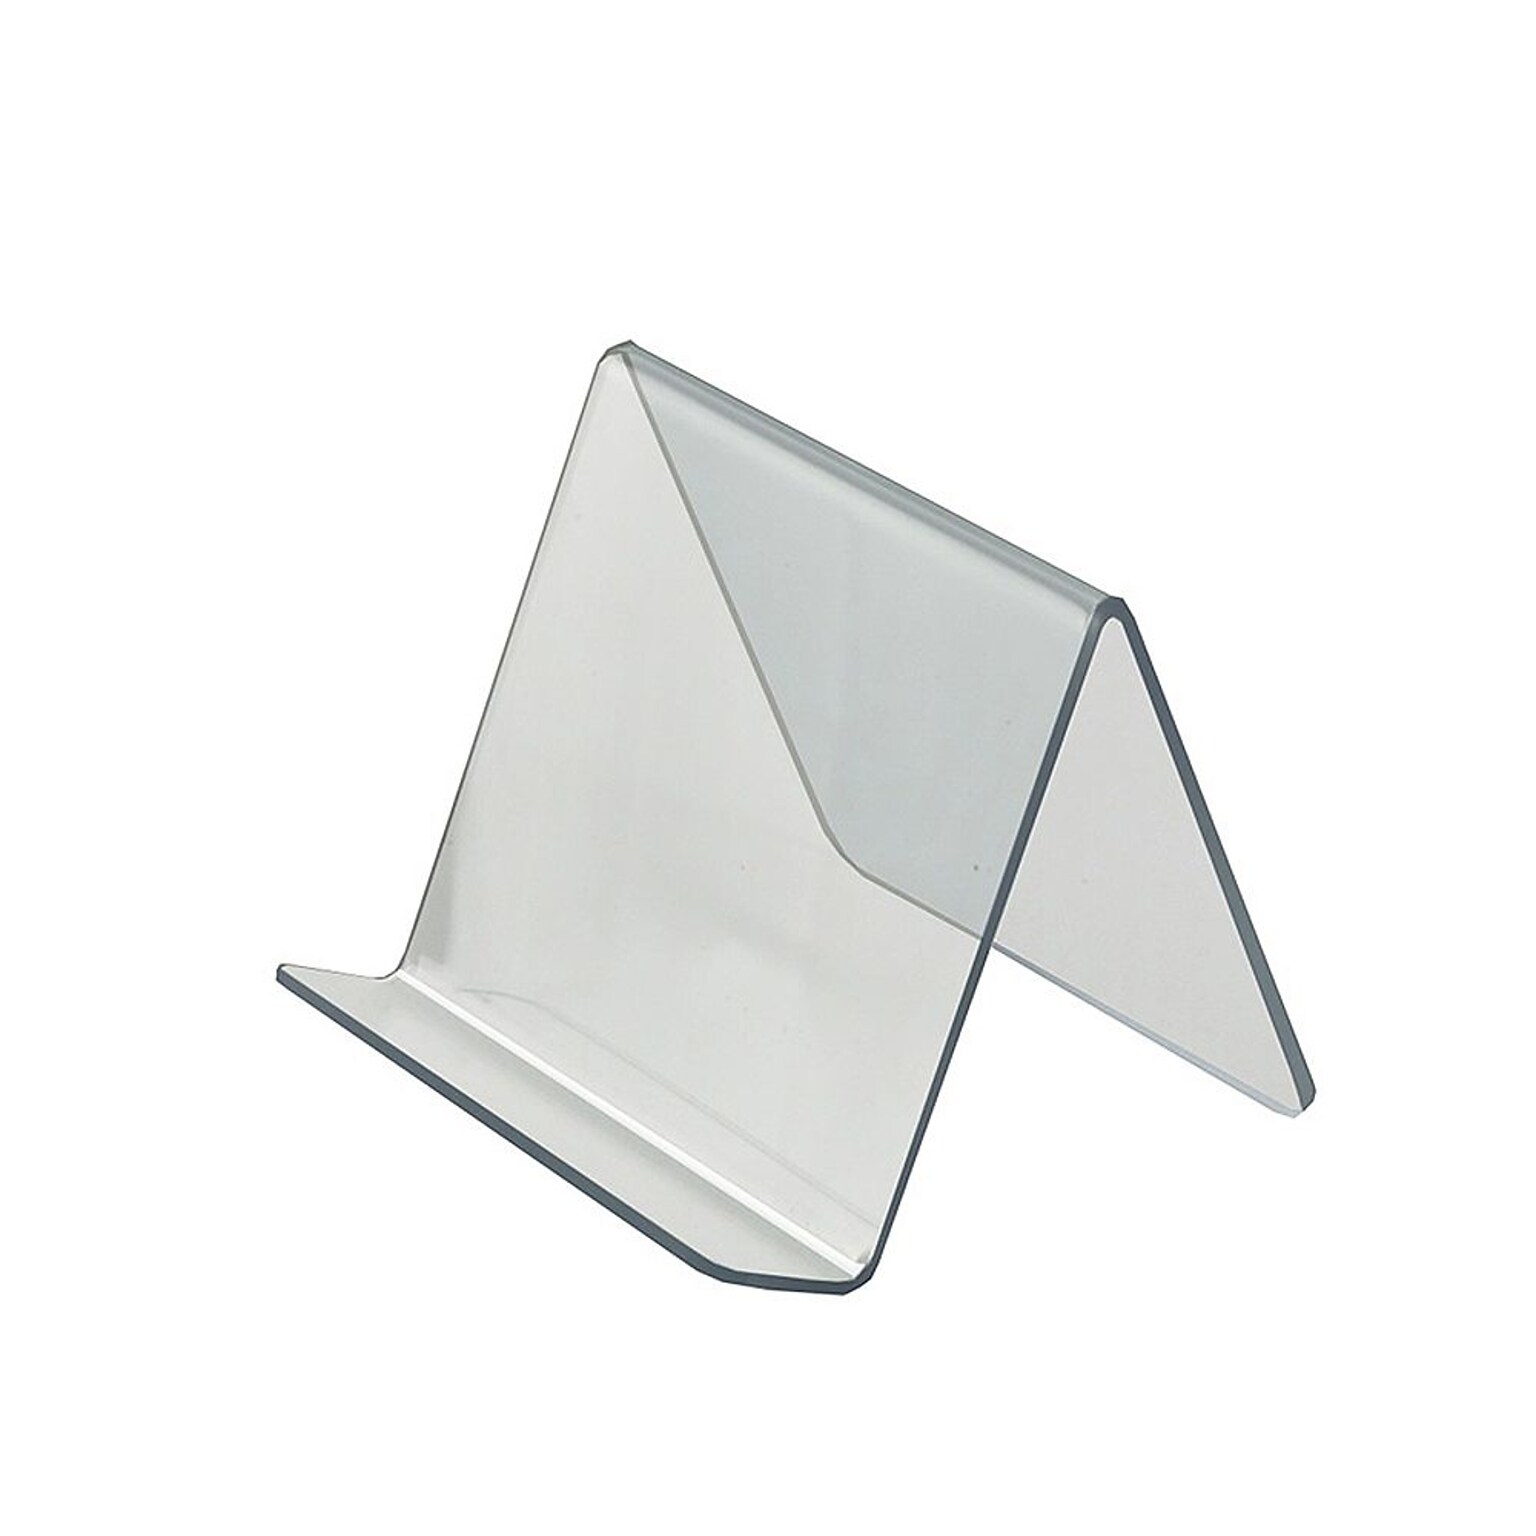 Azar Displays 5W x 5D x 4.125H Easel Display. Front Lip: 1.25H, 10-Pack (515420)